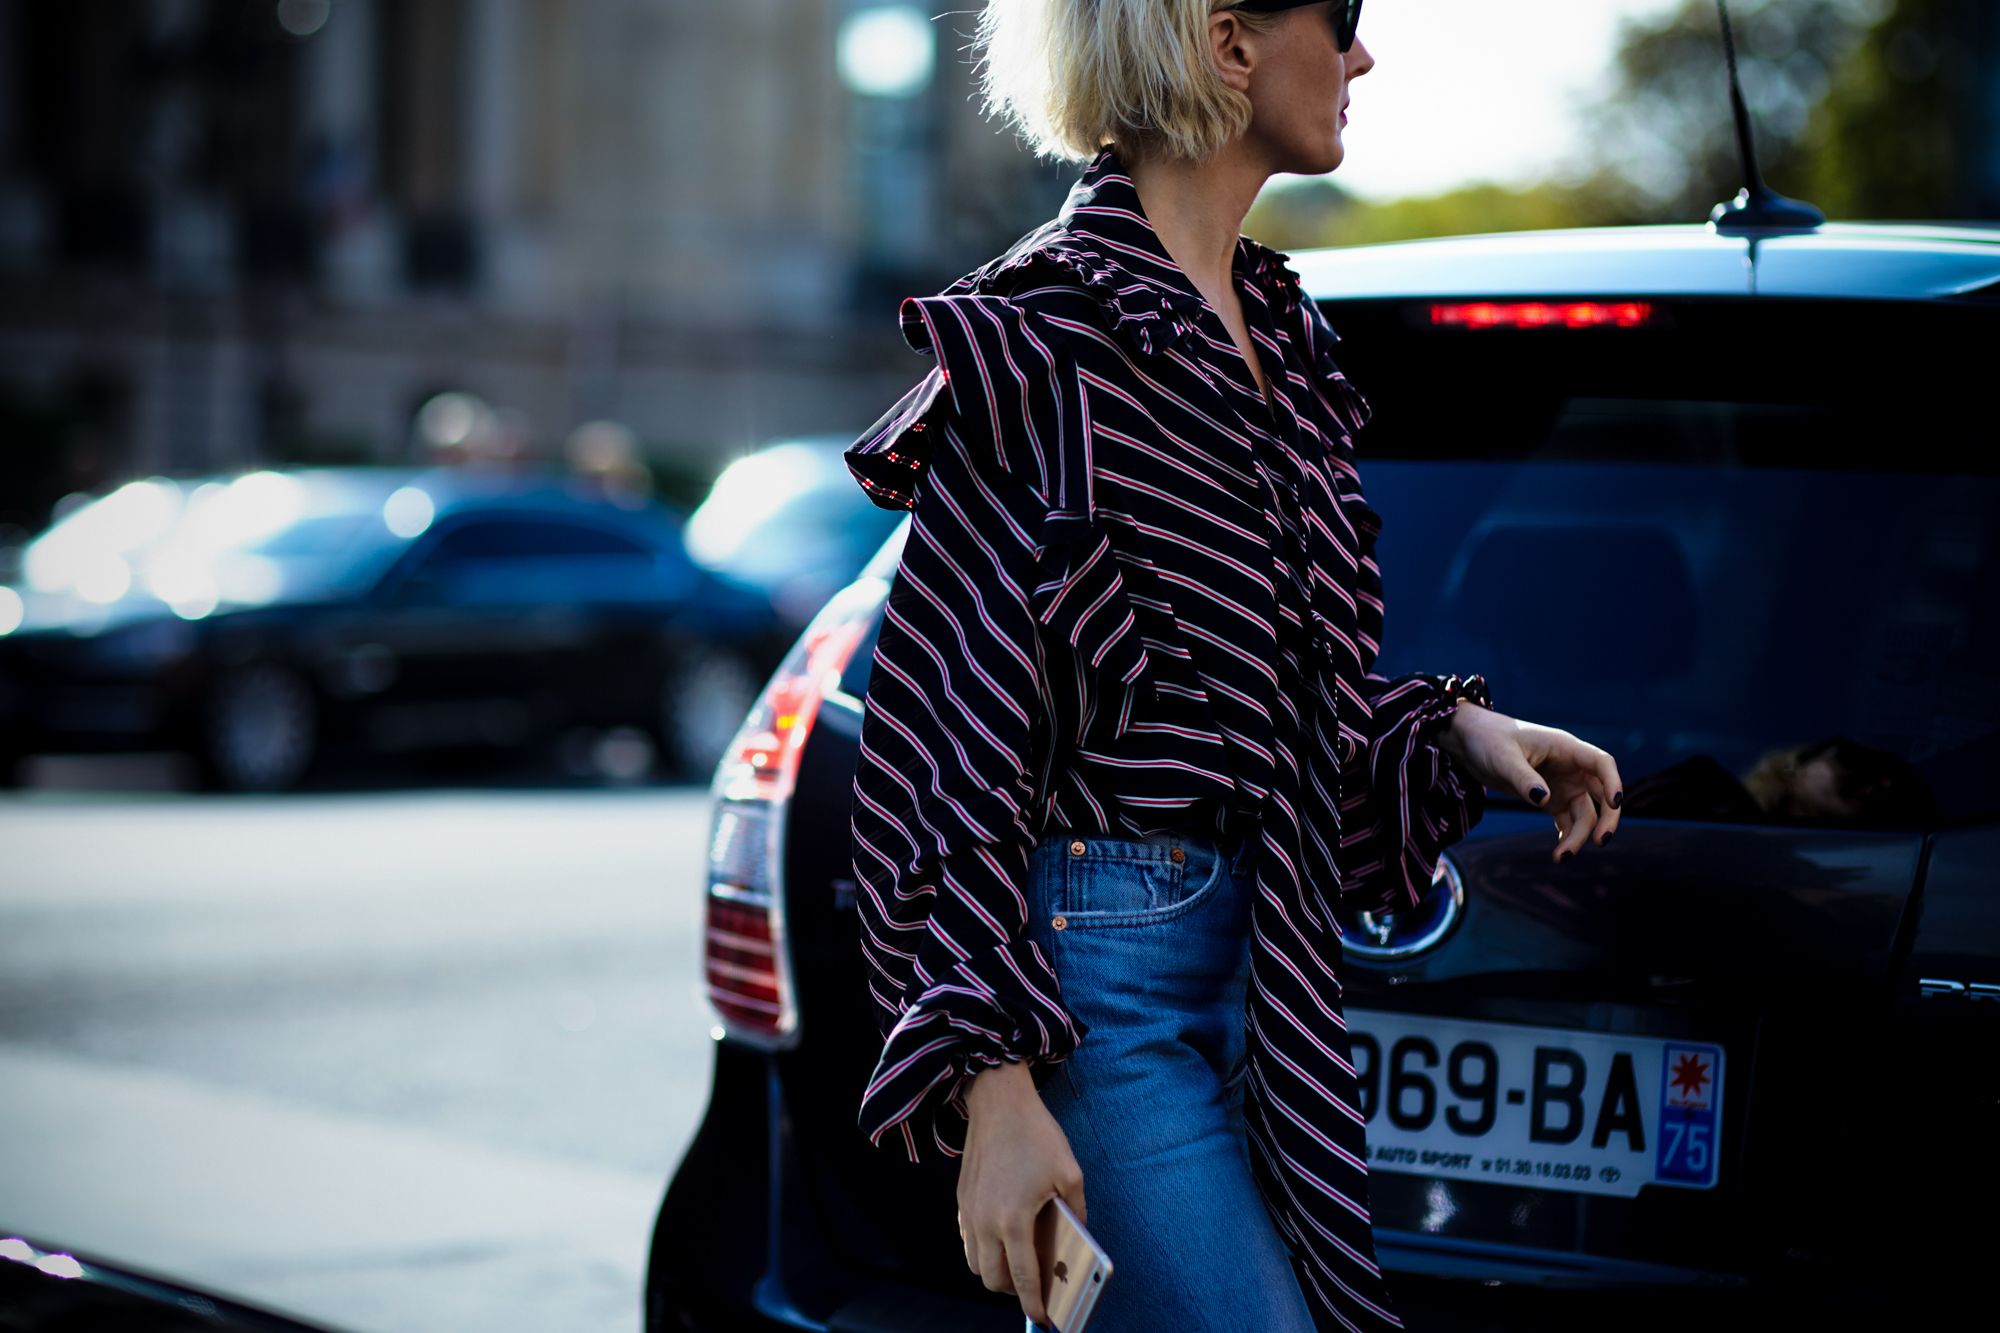 PFW Spring-Summer 2017 Street Style: A woman wearing a ruffle blouse and jeans before a fashion show in Paris, France